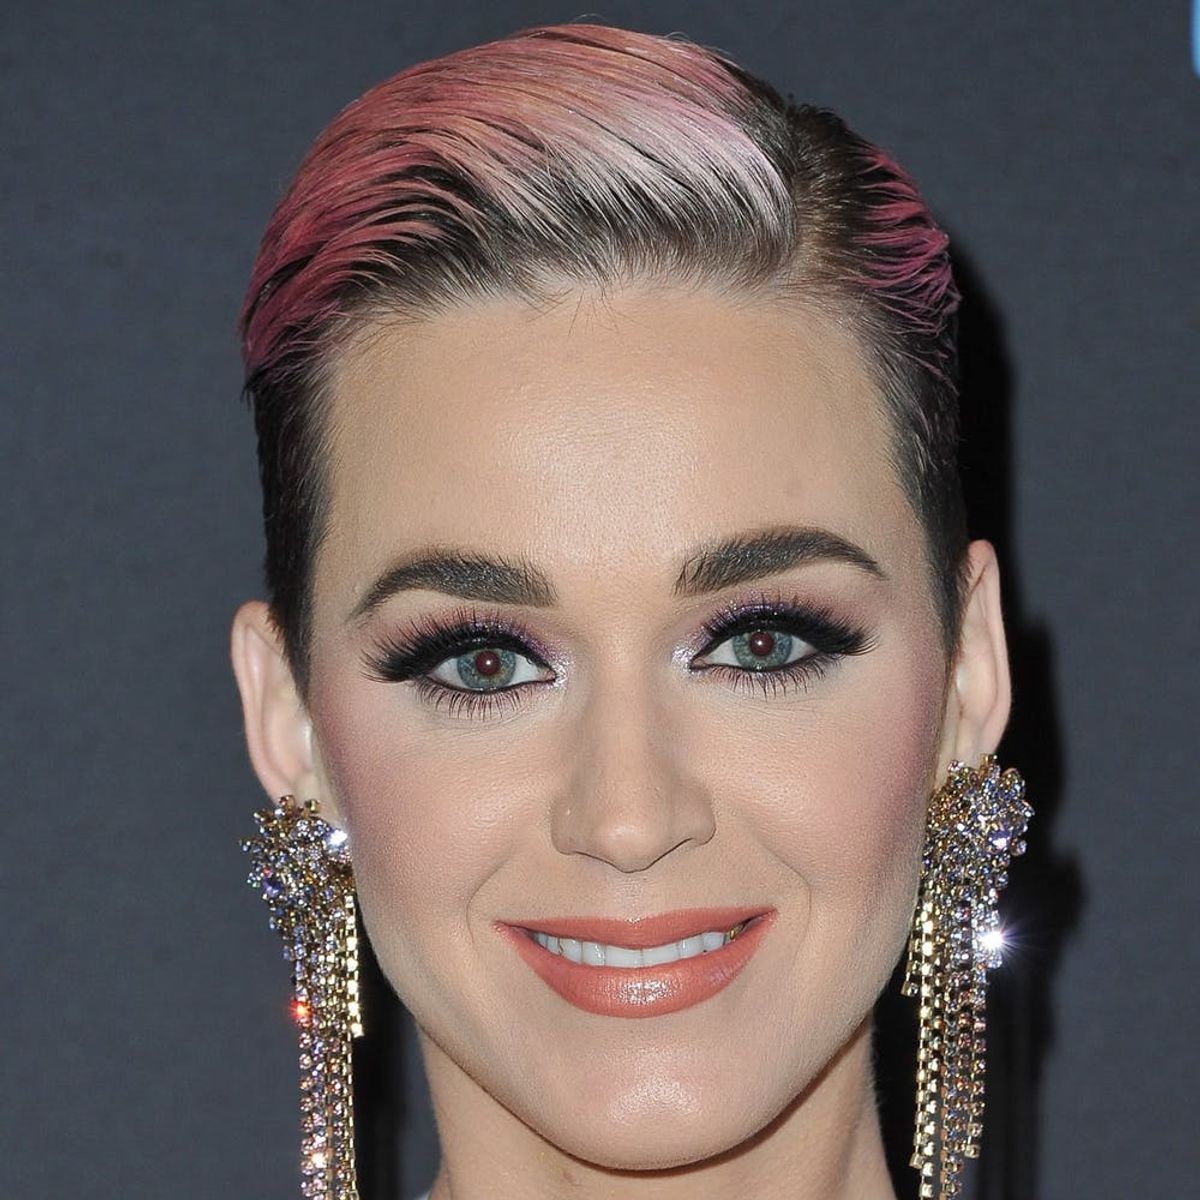 Katy Perry Trades Her Pink Locks in for Yet Another New Hair Hue